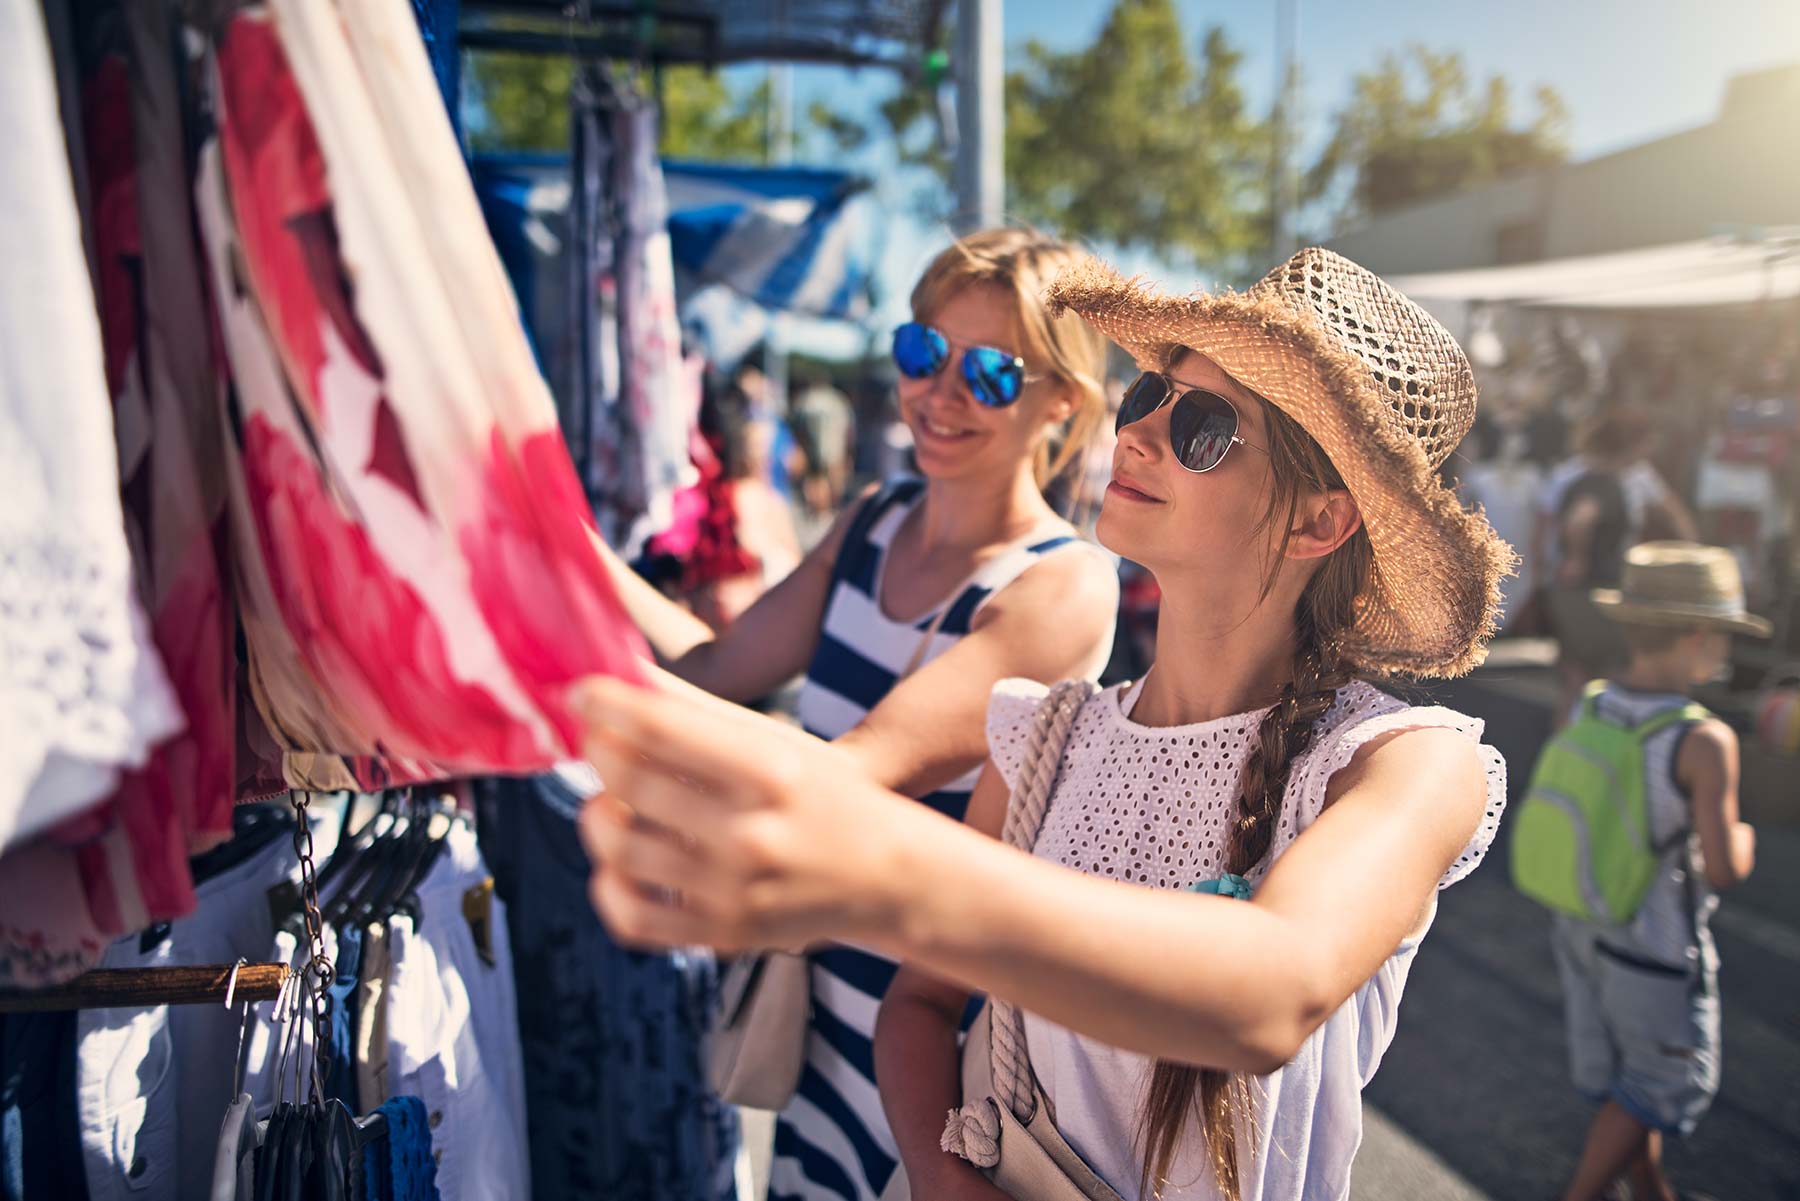 Two women looking at clothing on a rack outdoors on a sunny day sunglasses and a hat on.